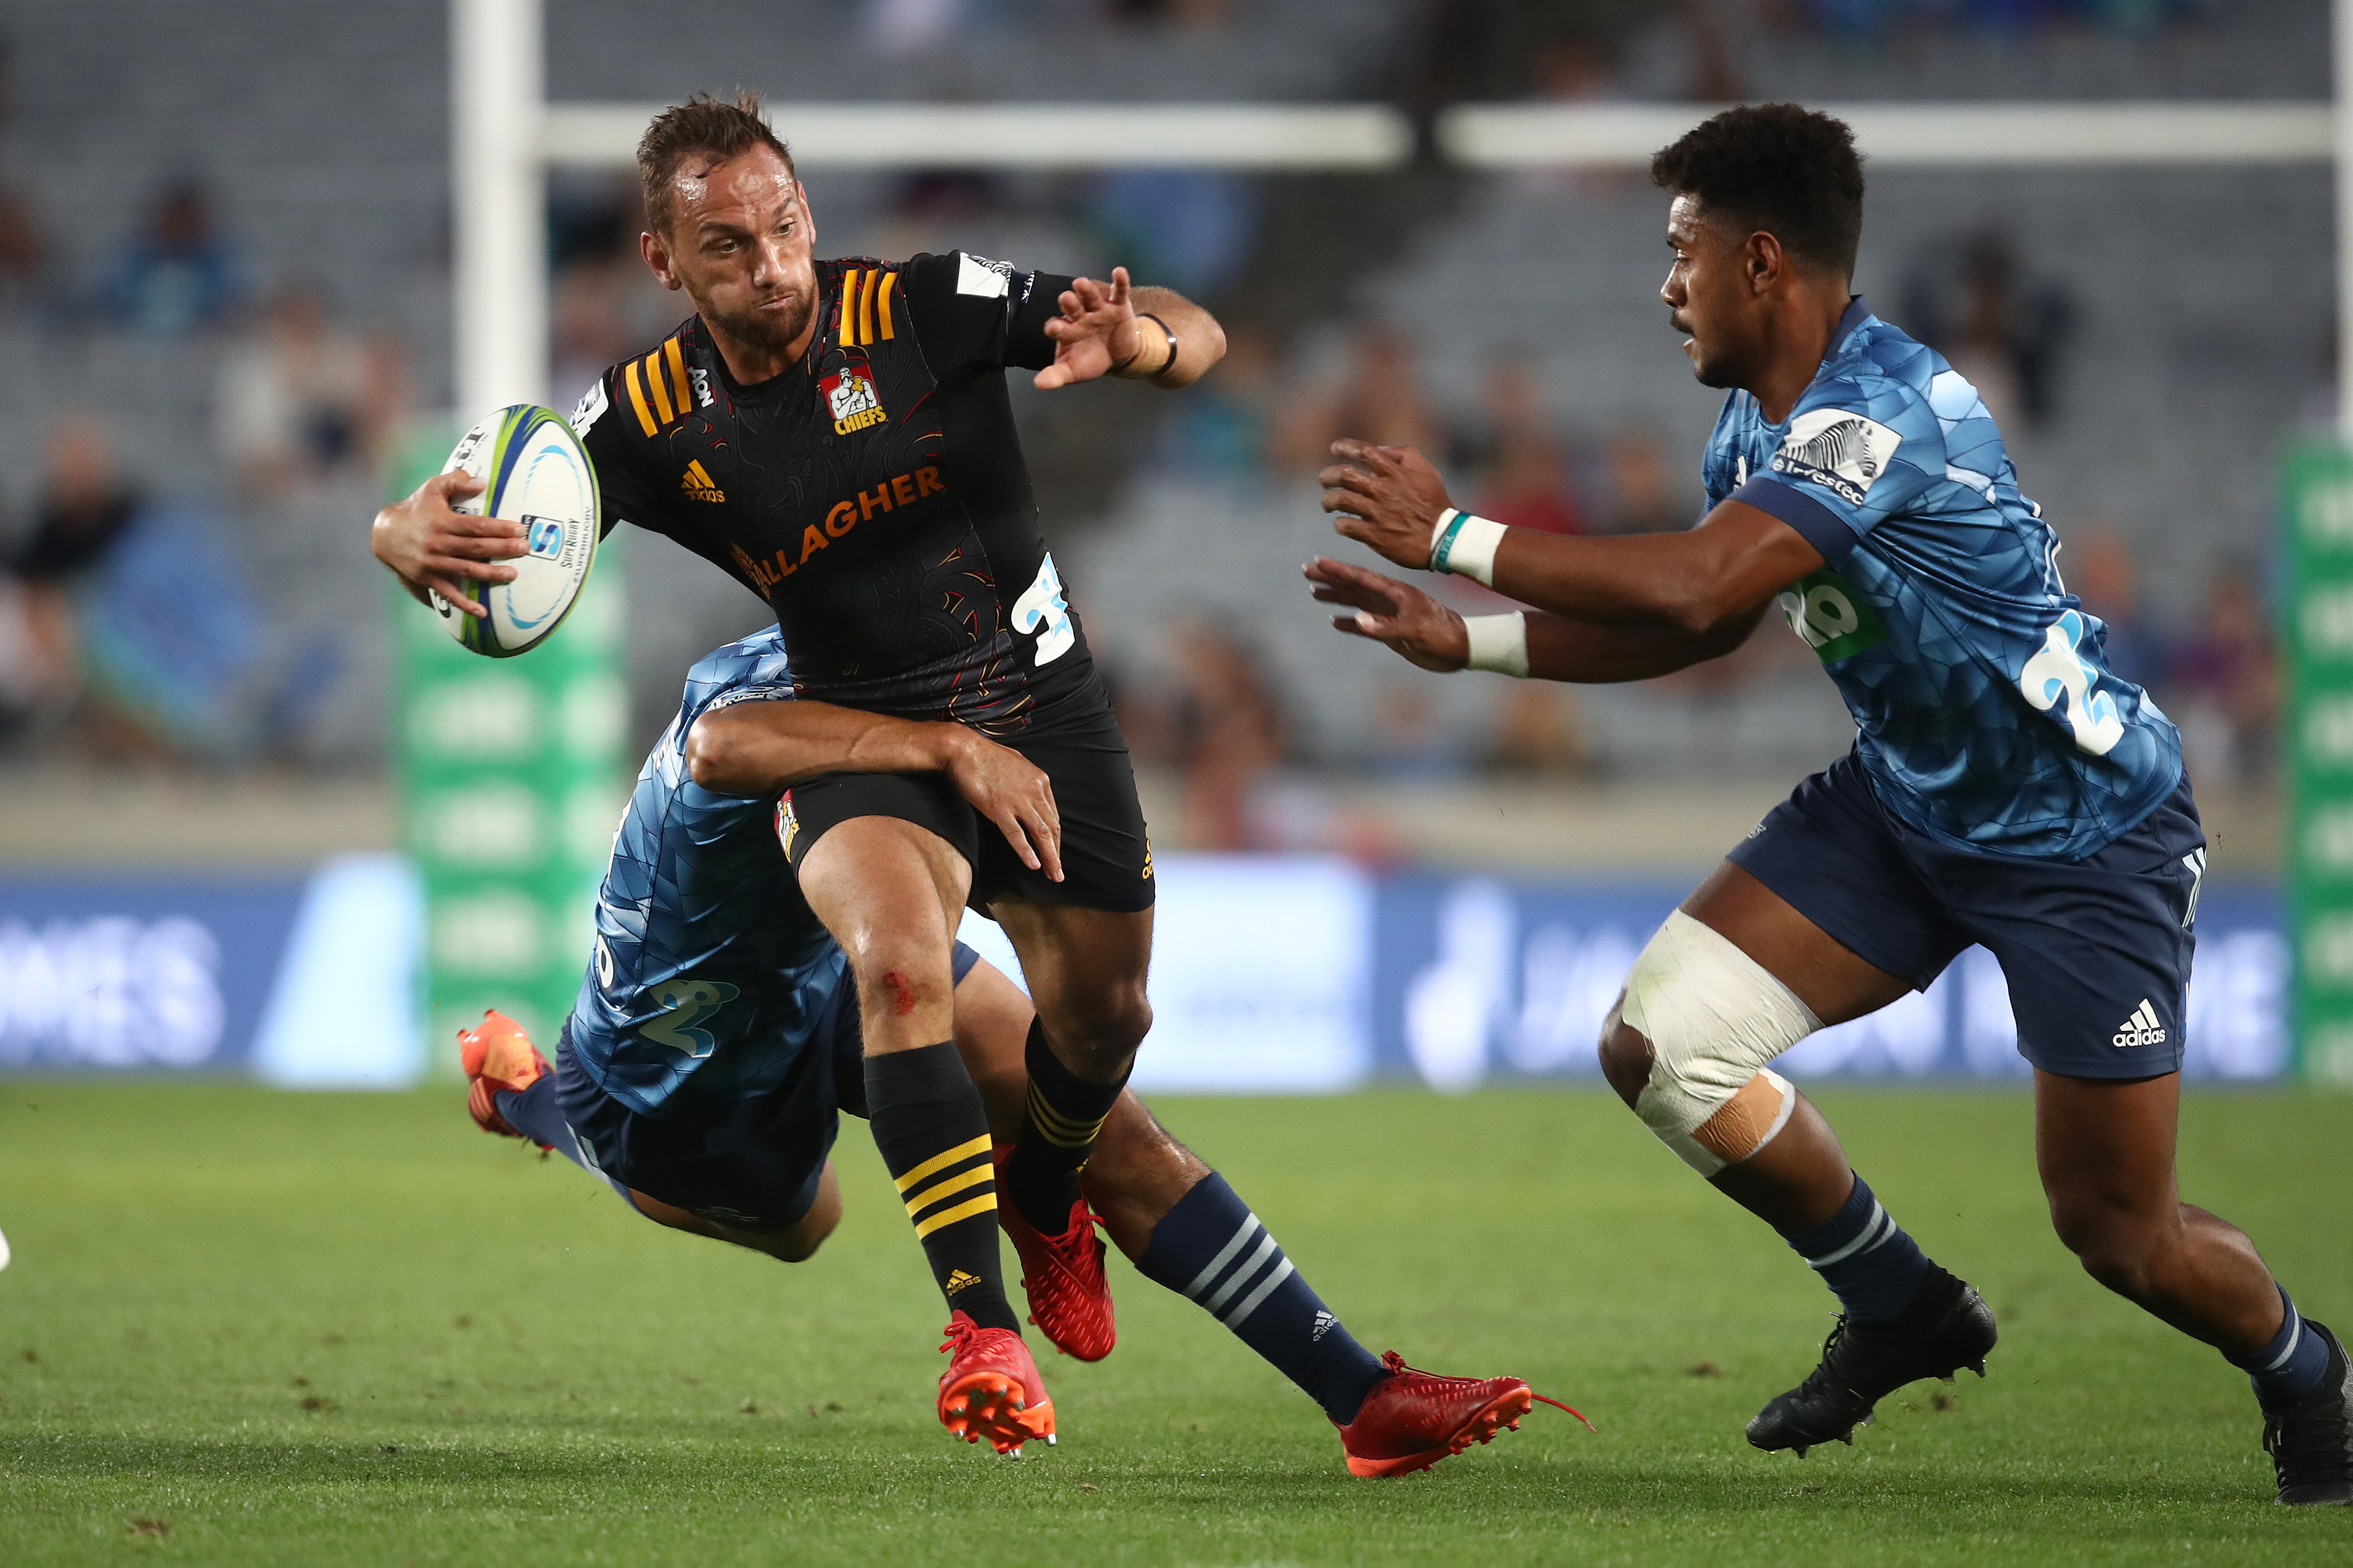 PREVIEW: Investec Super Rugby Aotearoa – Chiefs v Blues